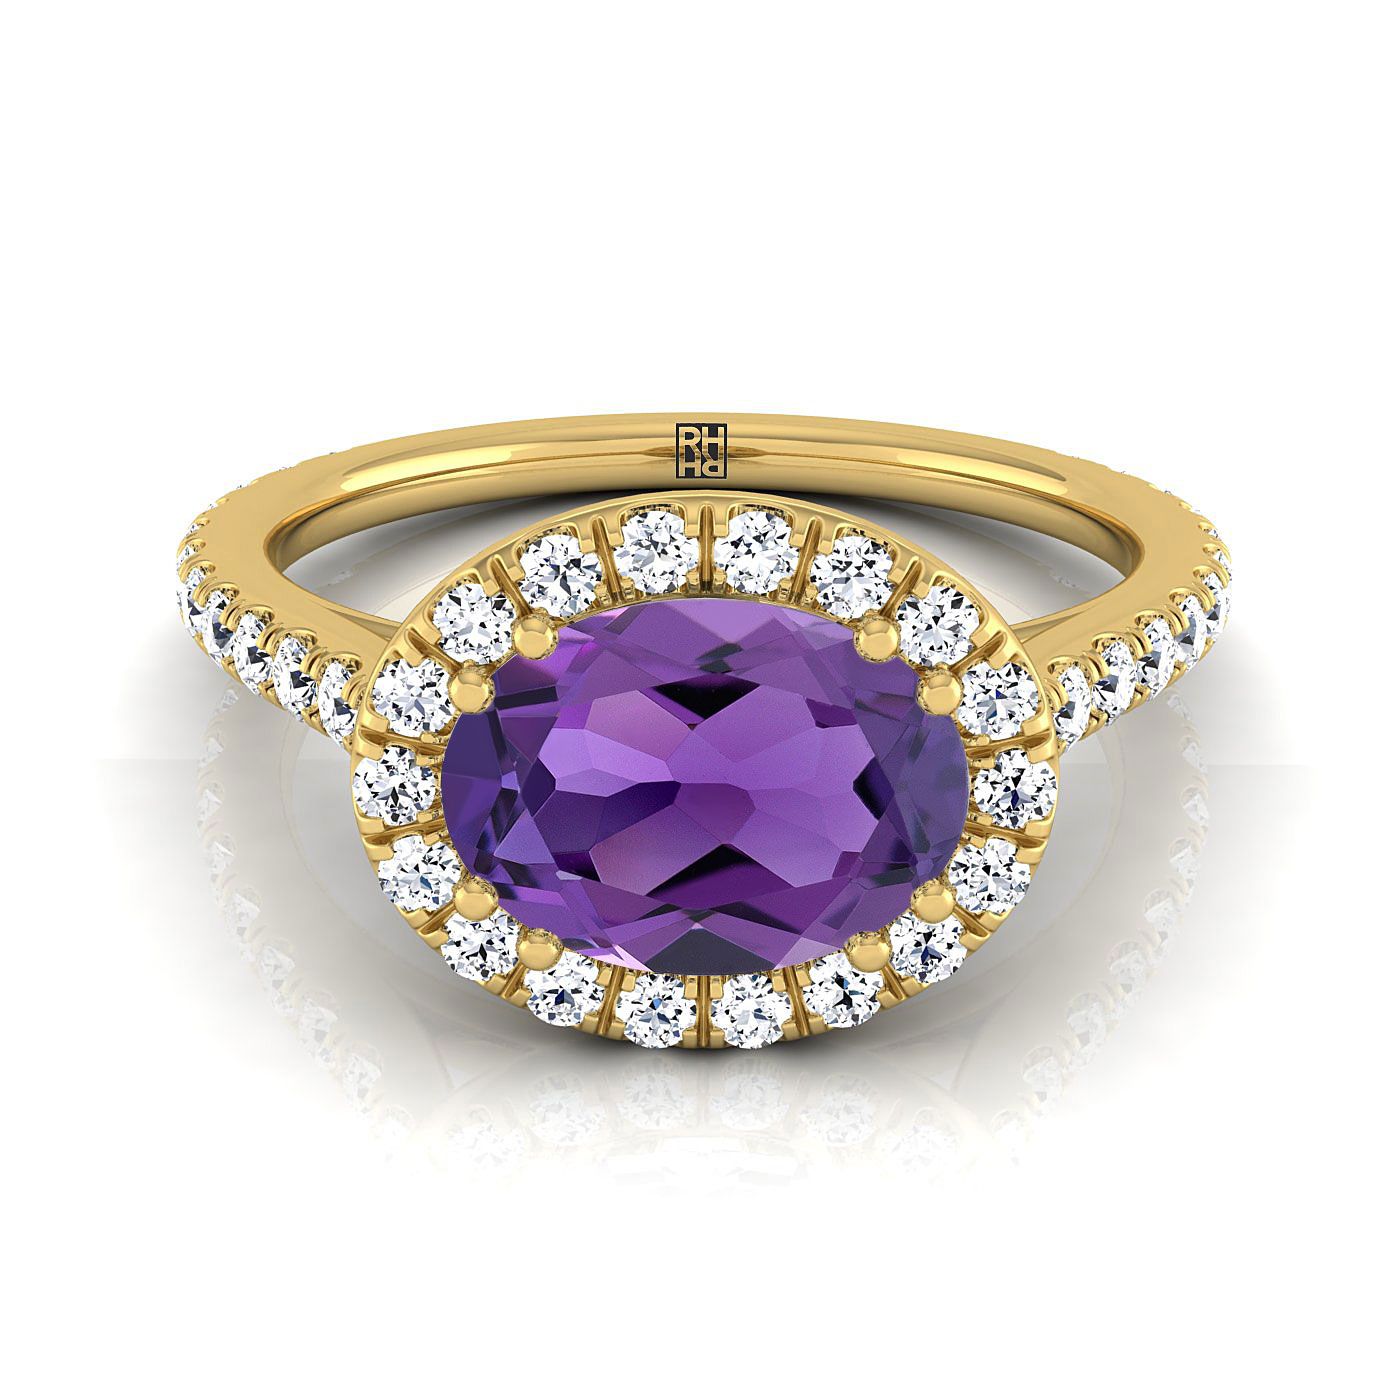 18K Yellow Gold Oval Amethyst Horizontal Fancy East West Diamond Halo Engagement Ring -1/2ctw